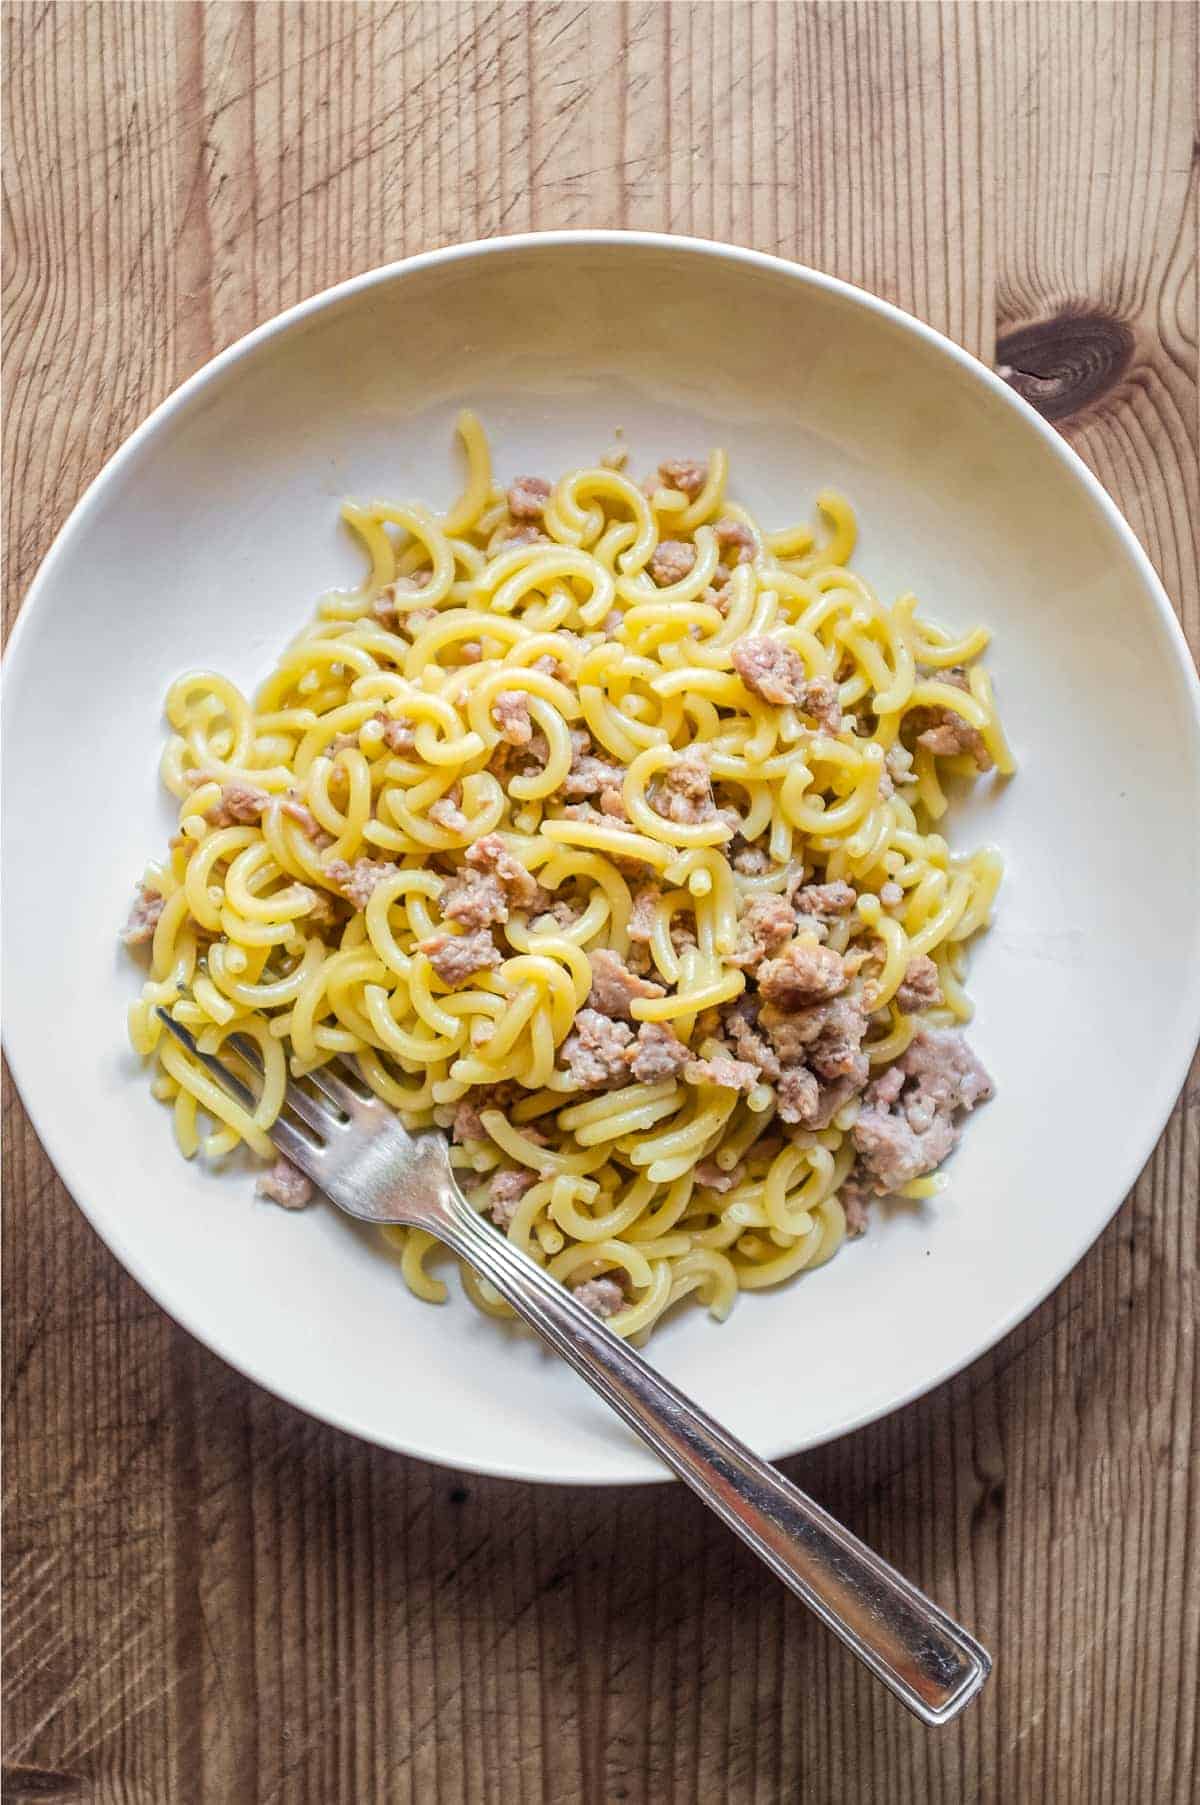 A bowl of noodles with meat and a fork, featuring a delicious ground sausage topping.